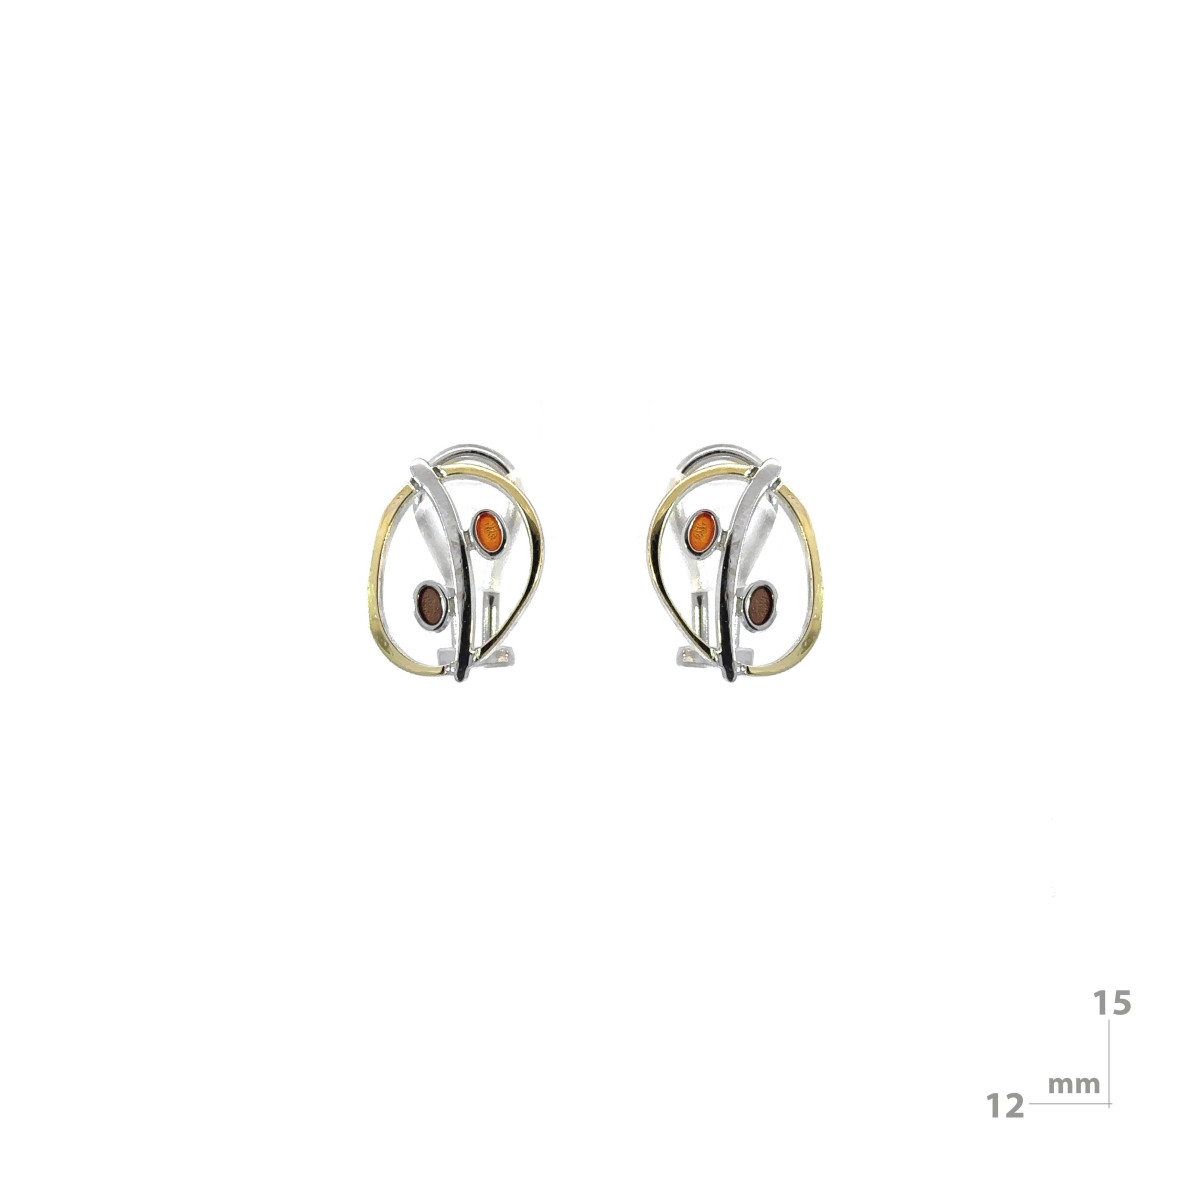 Earrings made of silver, gold and enamel